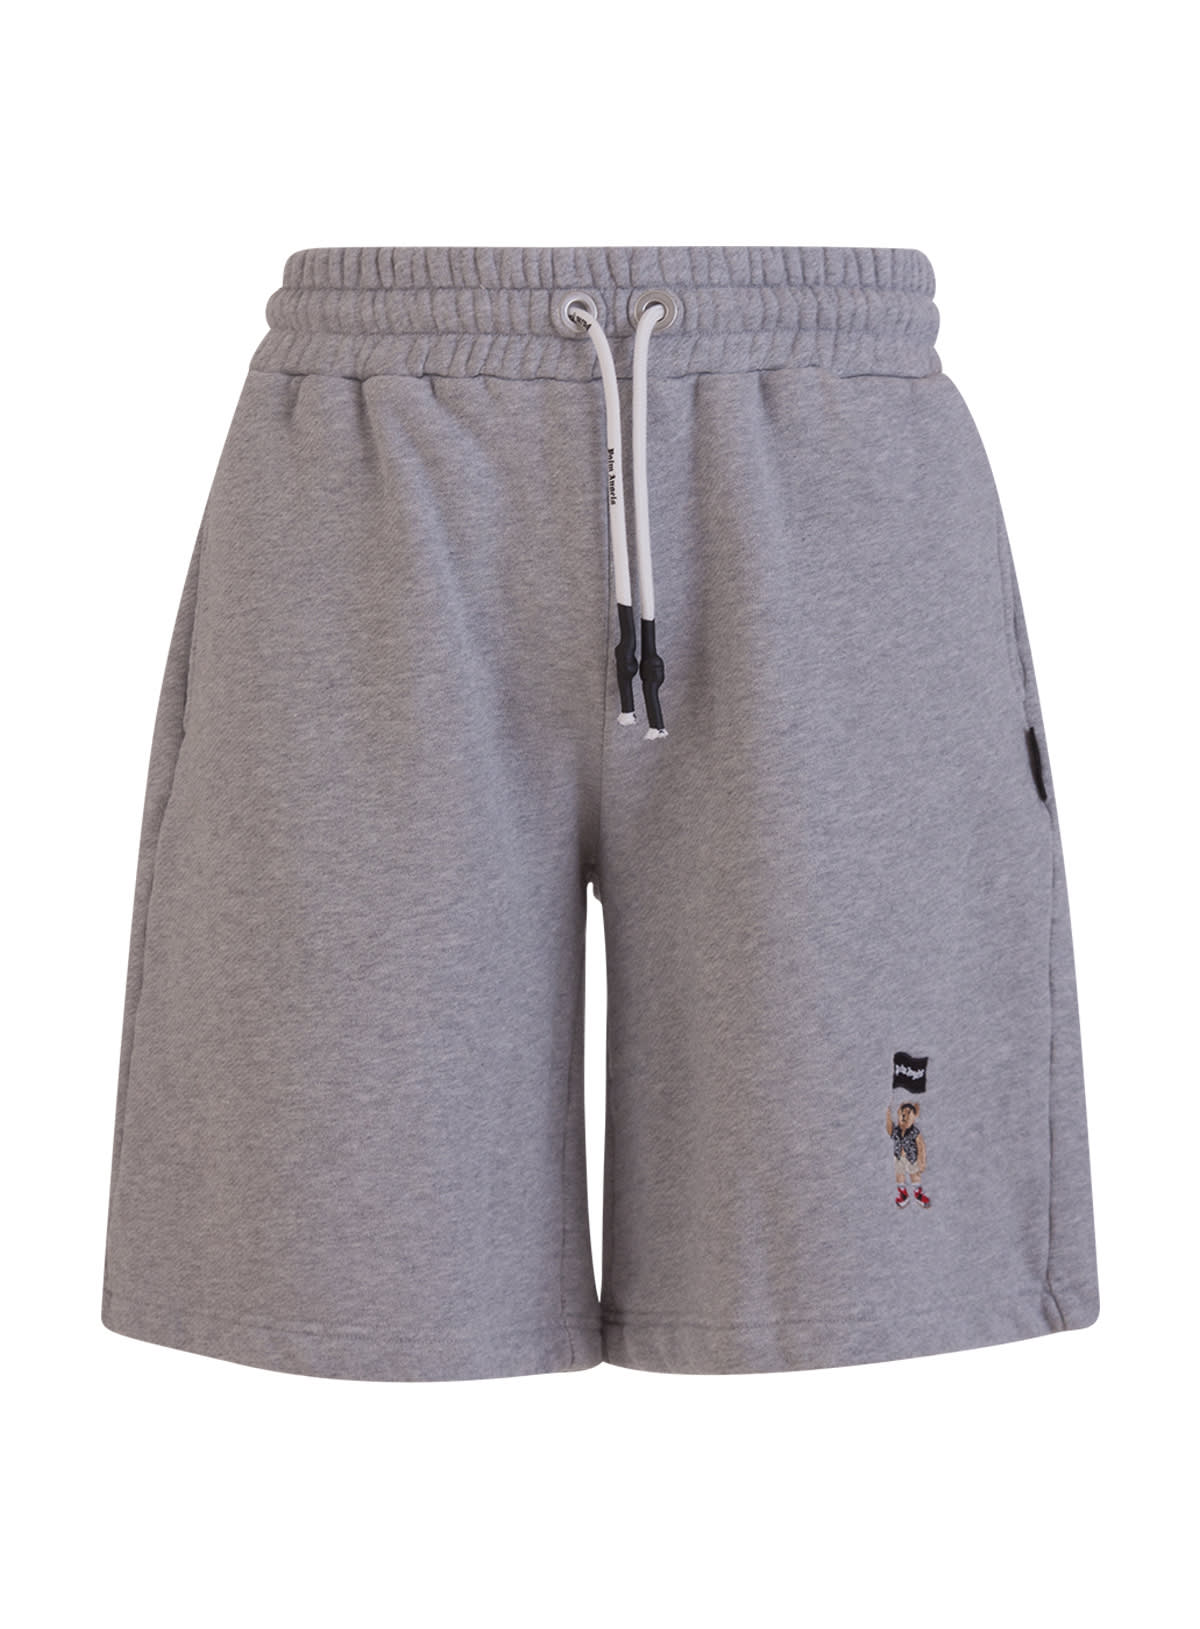 PALM ANGELS TRACK SHORTS,PMCI010 FLE0020901